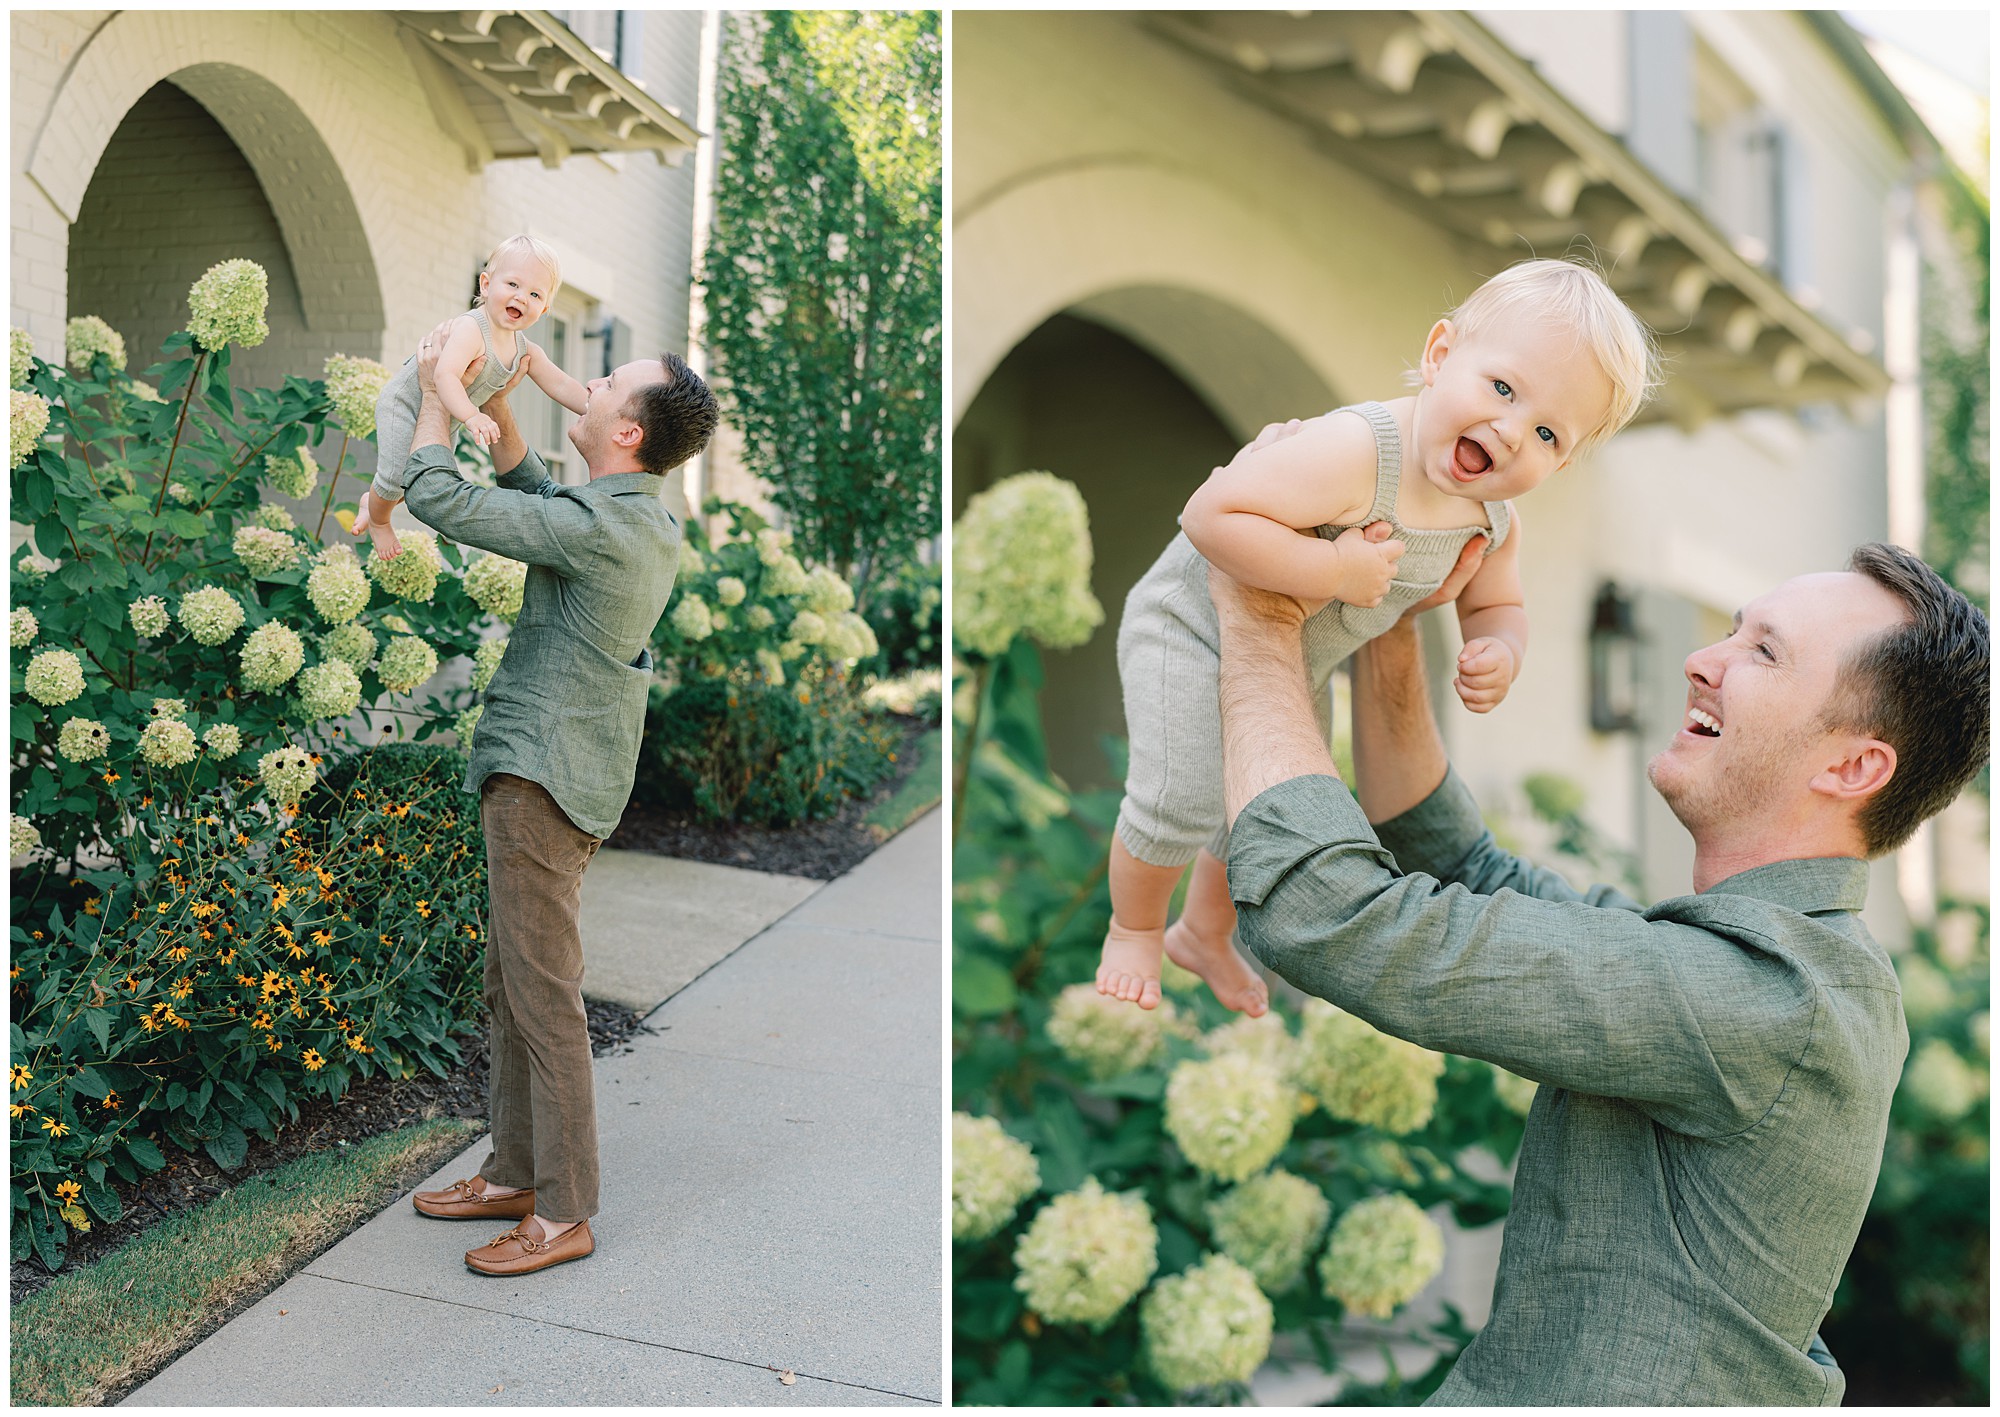 Two perspectives of a father holding his toddler son up in the air while the young boy smiles toward the camera in front of a home with large green hydrangeas.